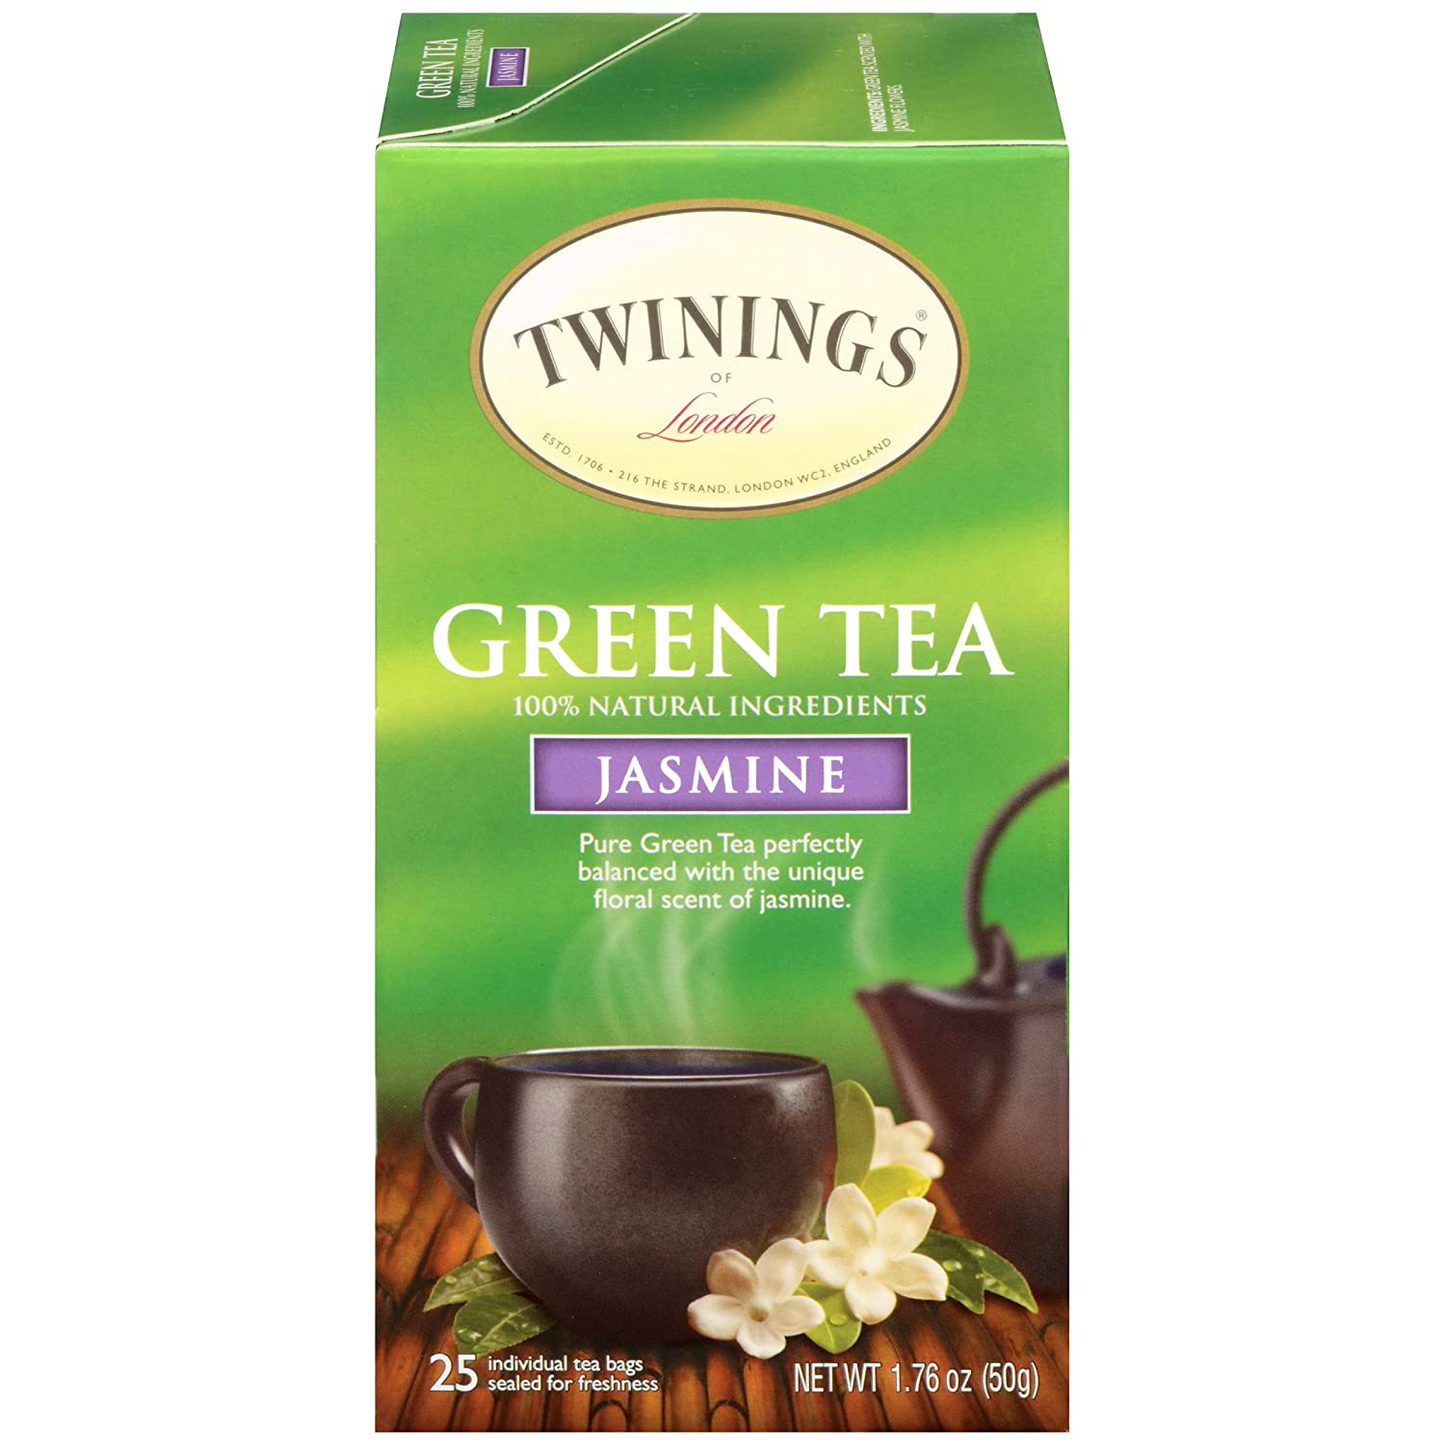 Twinings of London Buttermint Herbal Tea, 20 Count Bagged Tea (6 Pack)